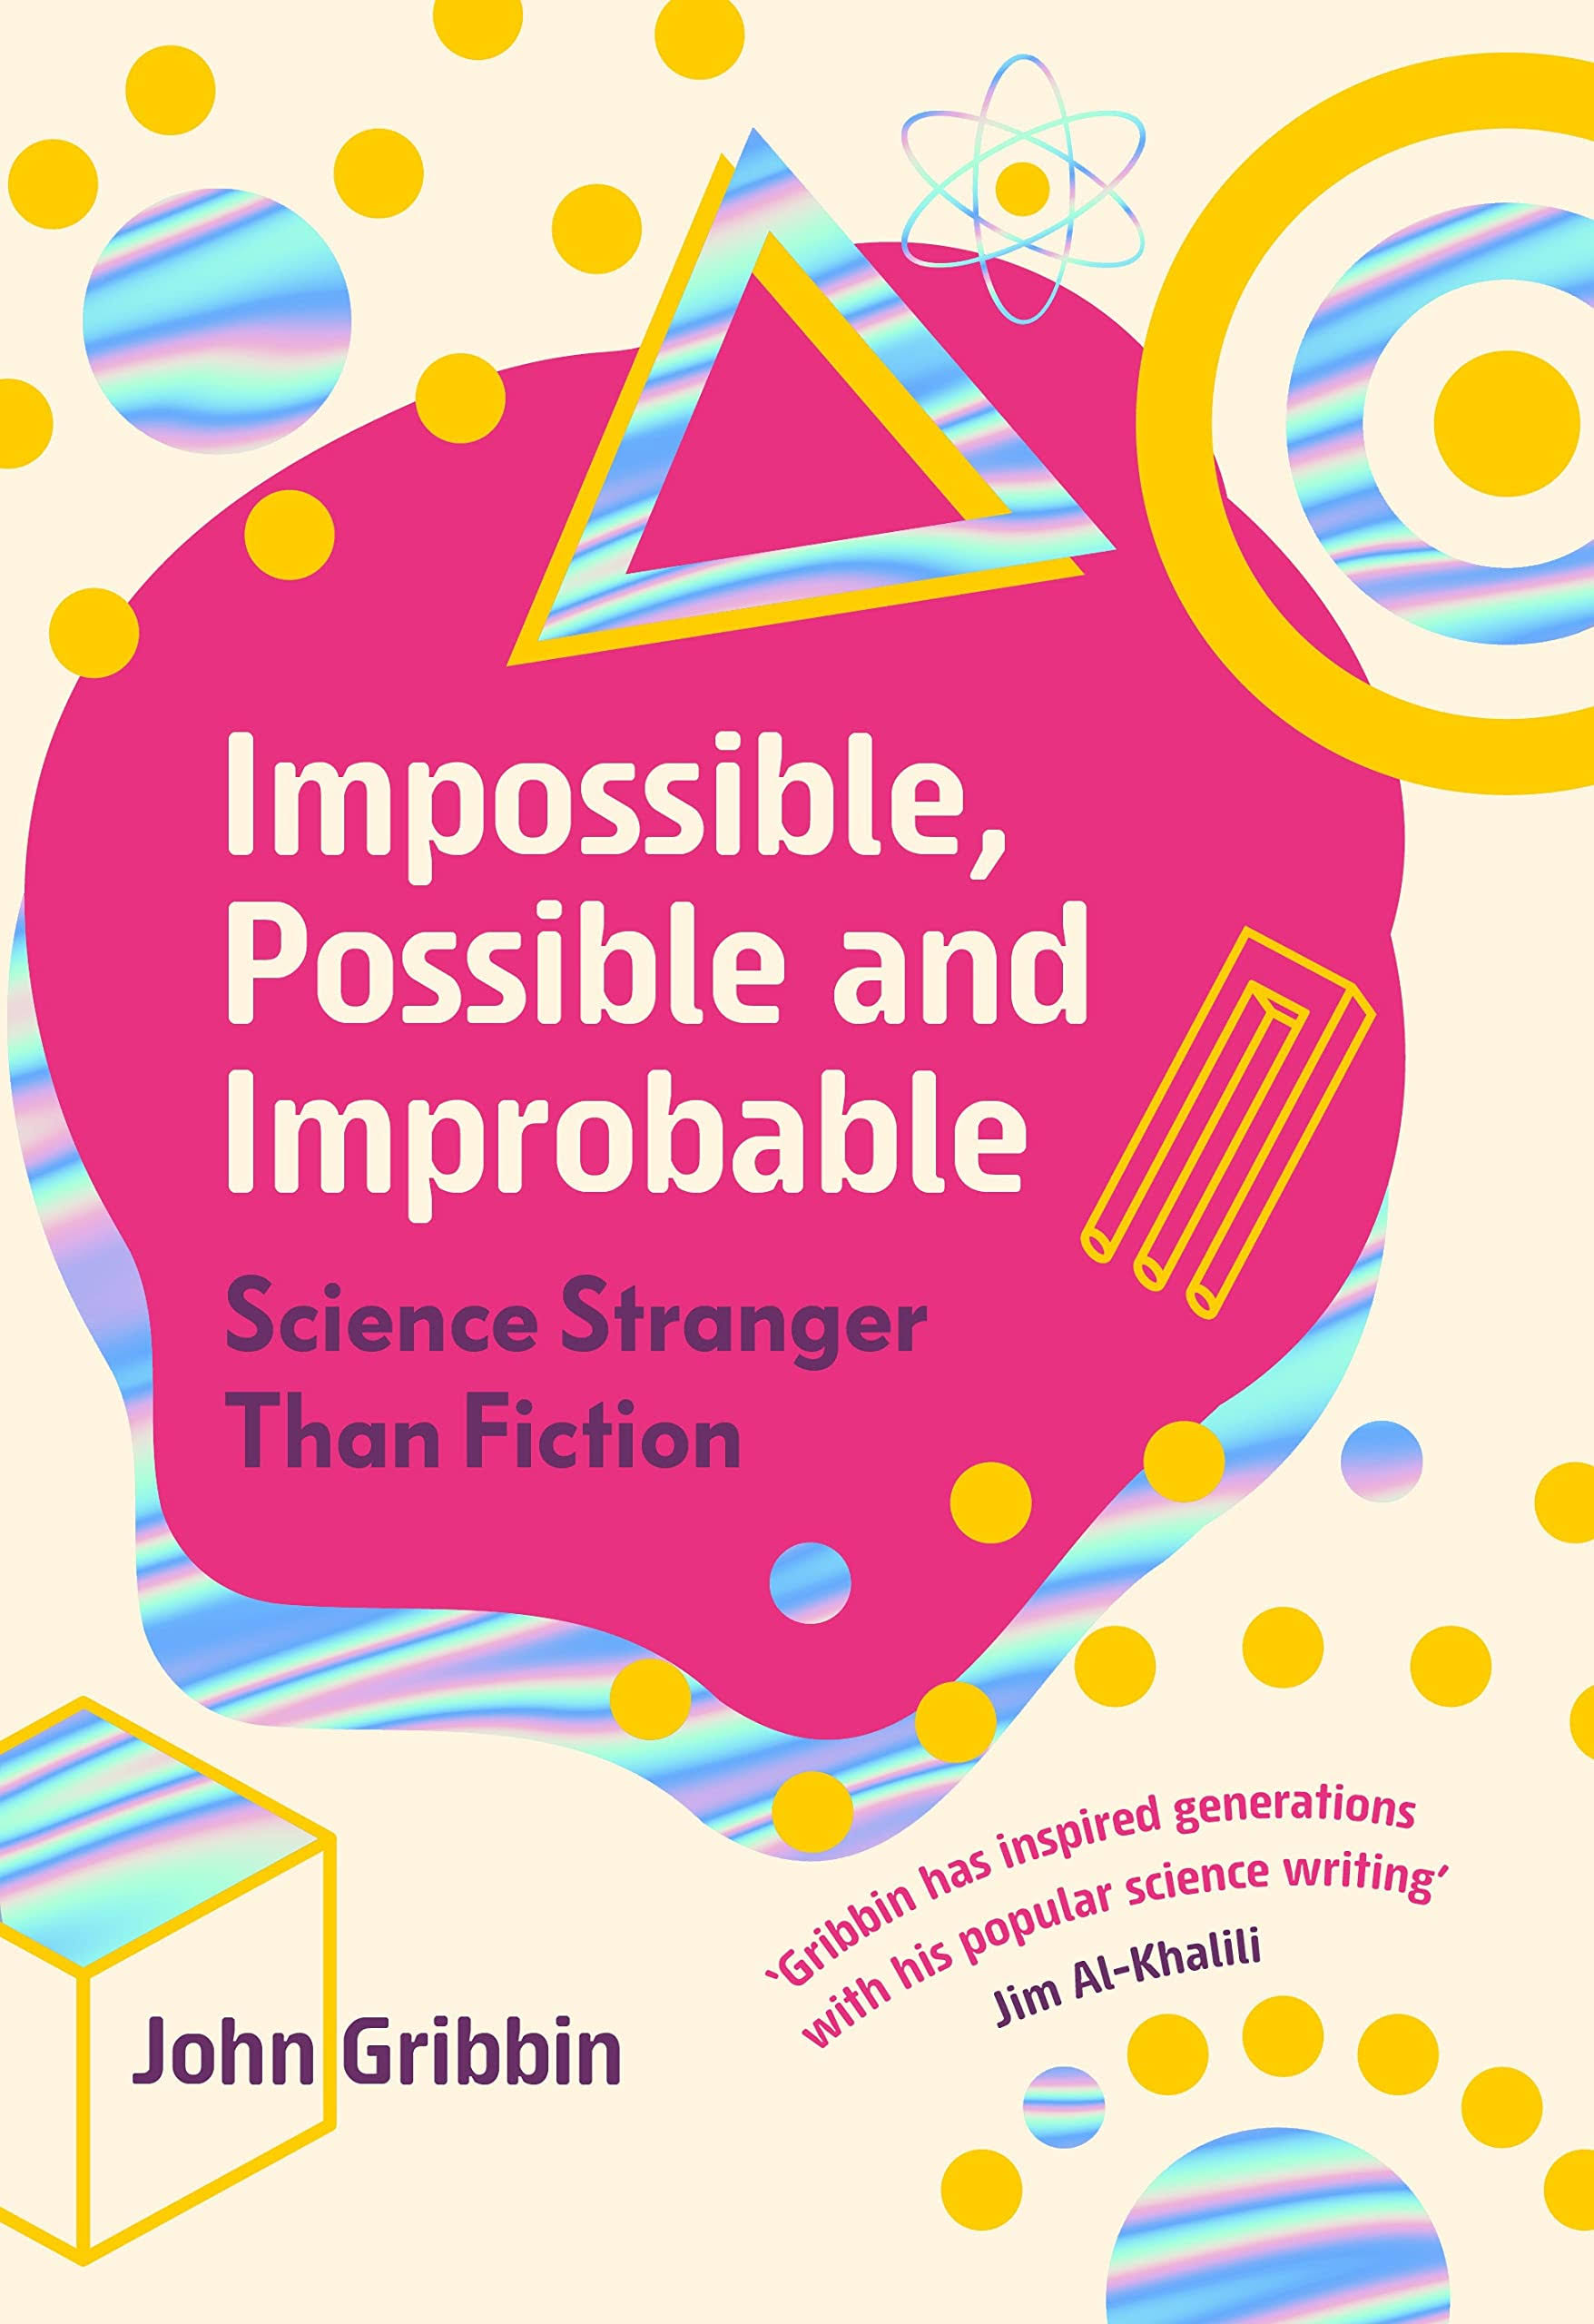 Impossible, Possible, and Improbable: Science Stranger Than Fiction [Book]